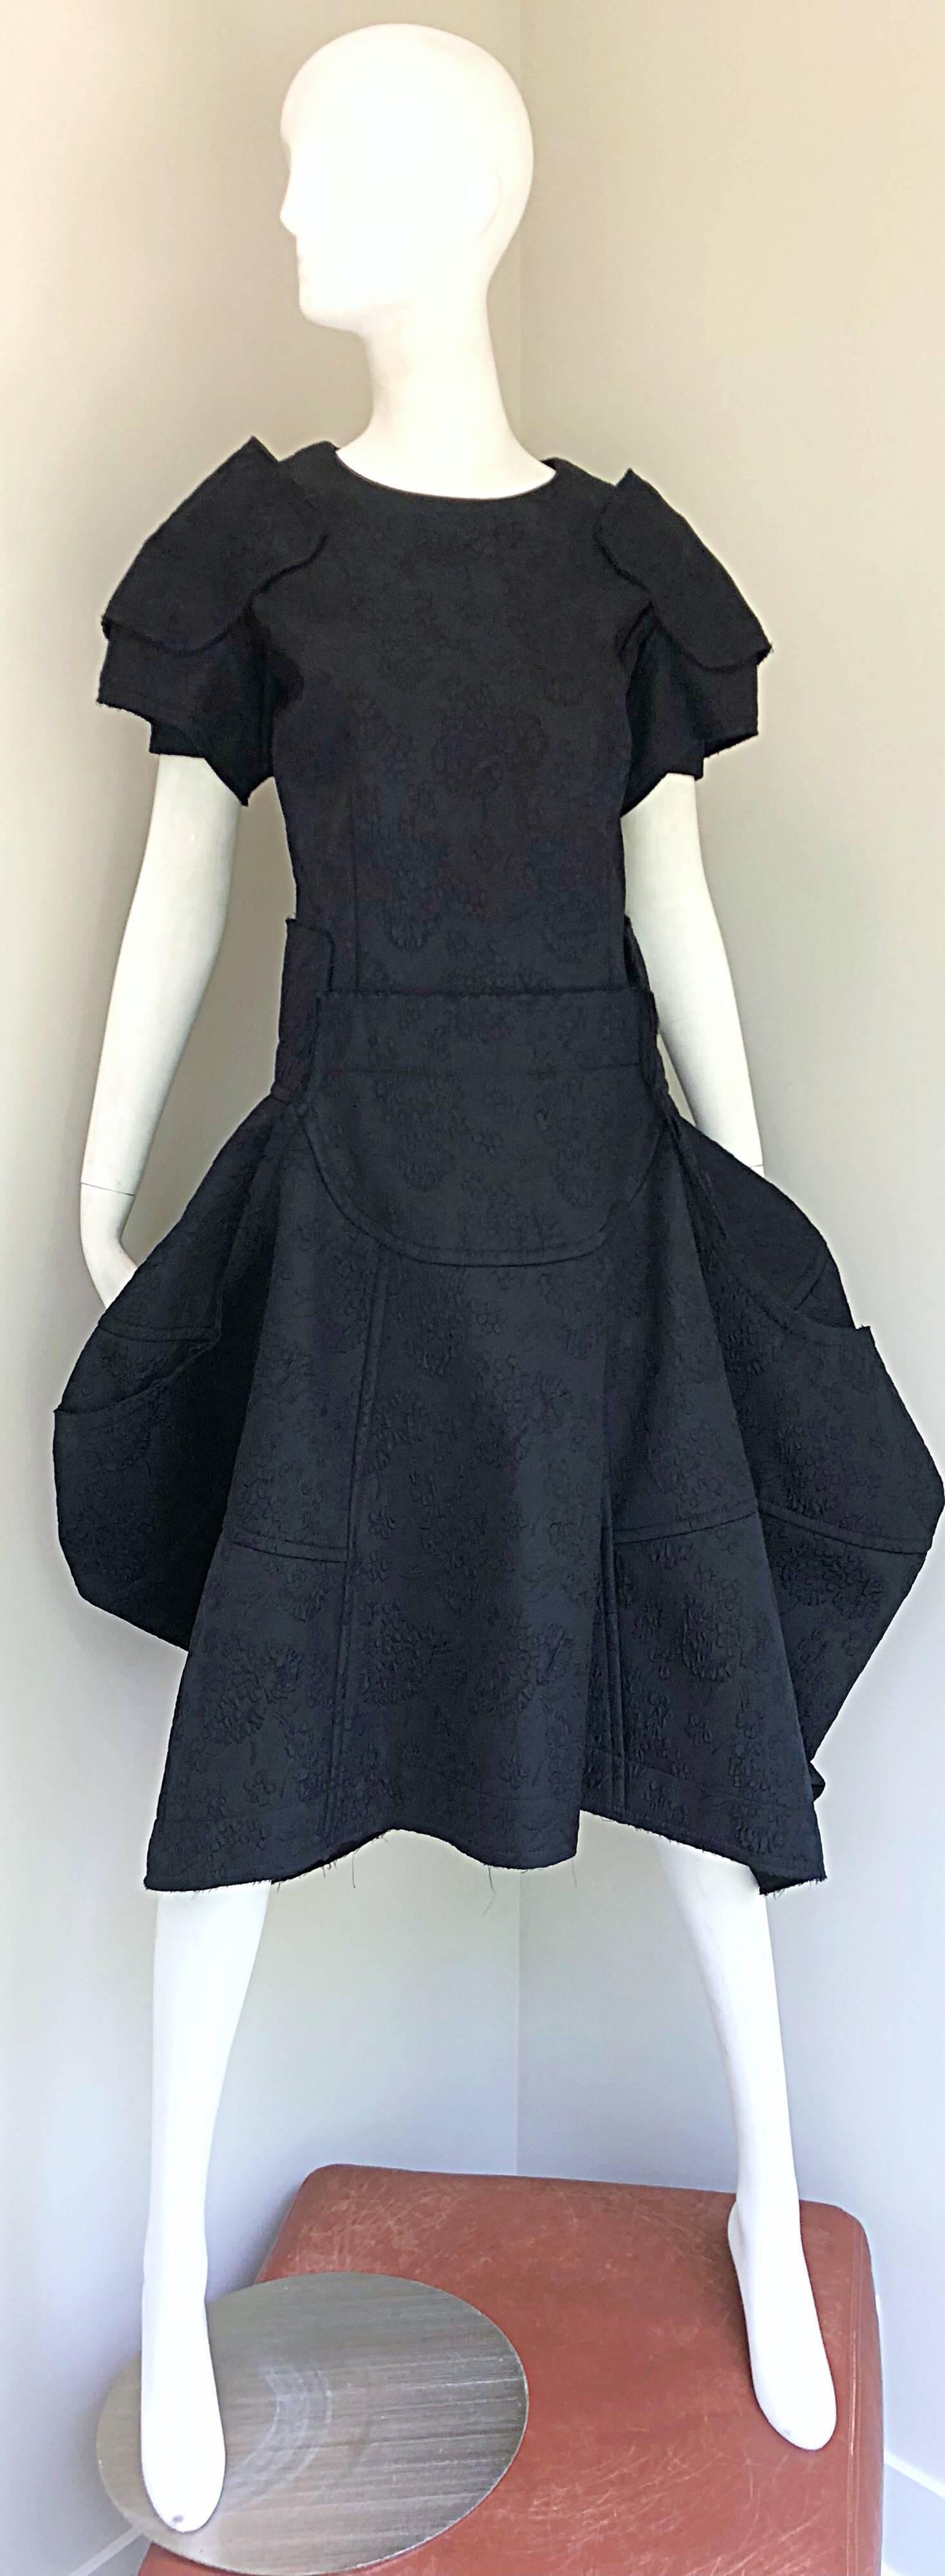 This COMME DES GARCONS black Samurai 2016 Collection dress is proof that fashion can be art! The architecture on the rare musuem quality gem is insane! Limited Edition for collectors. Thoughtfully constructed, with no detail spared. Features a